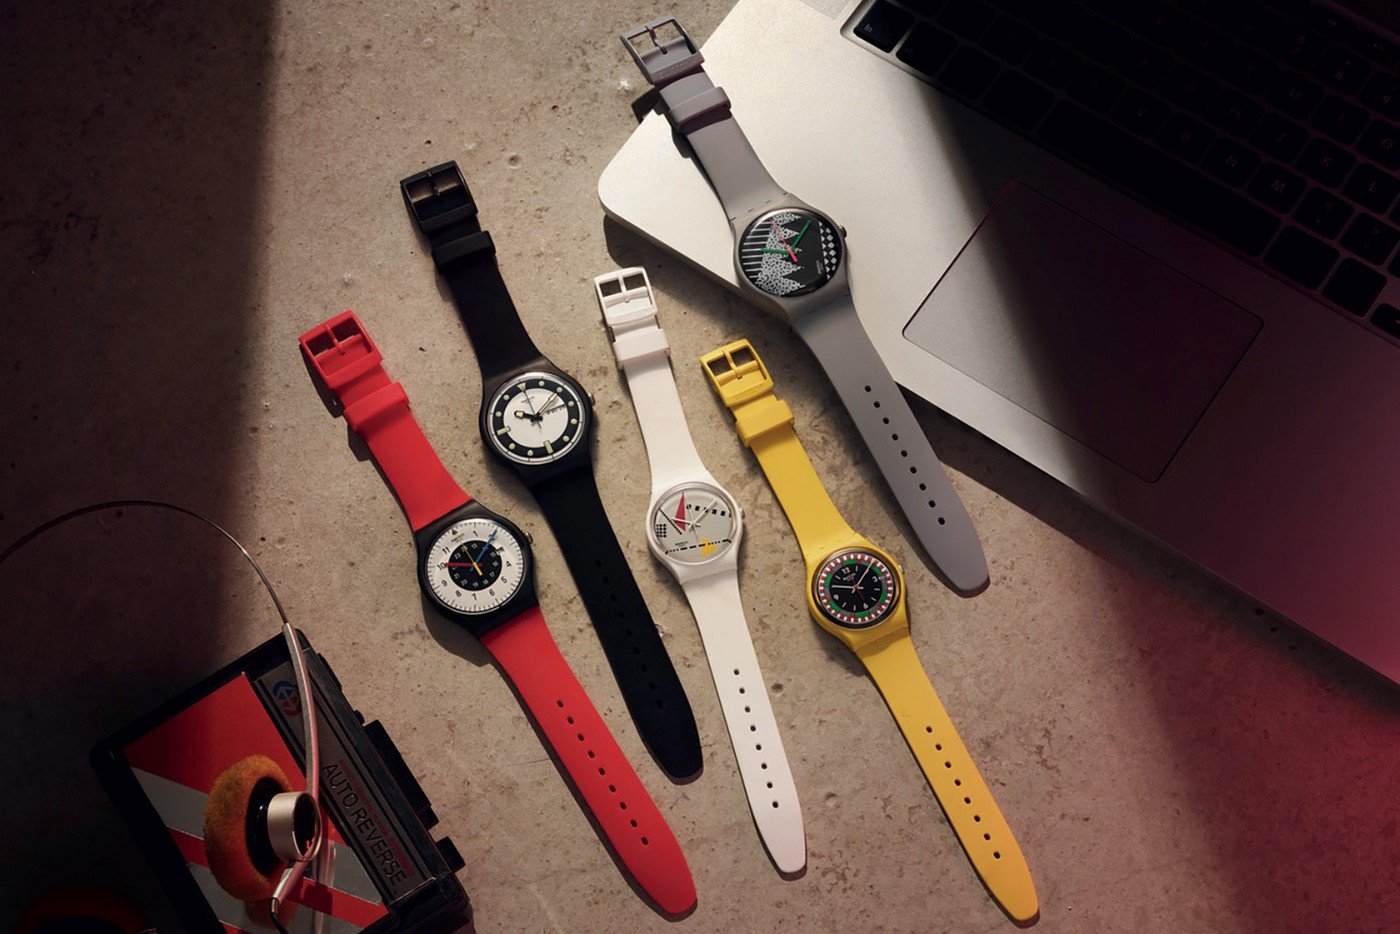 https___hypebeast.com_wp-content_blogs.dir_6_files_2021_10_swatch-1984-reloaded-collection-bioceramic-watches-time-pieces-release-where-to-buy-1.jpg